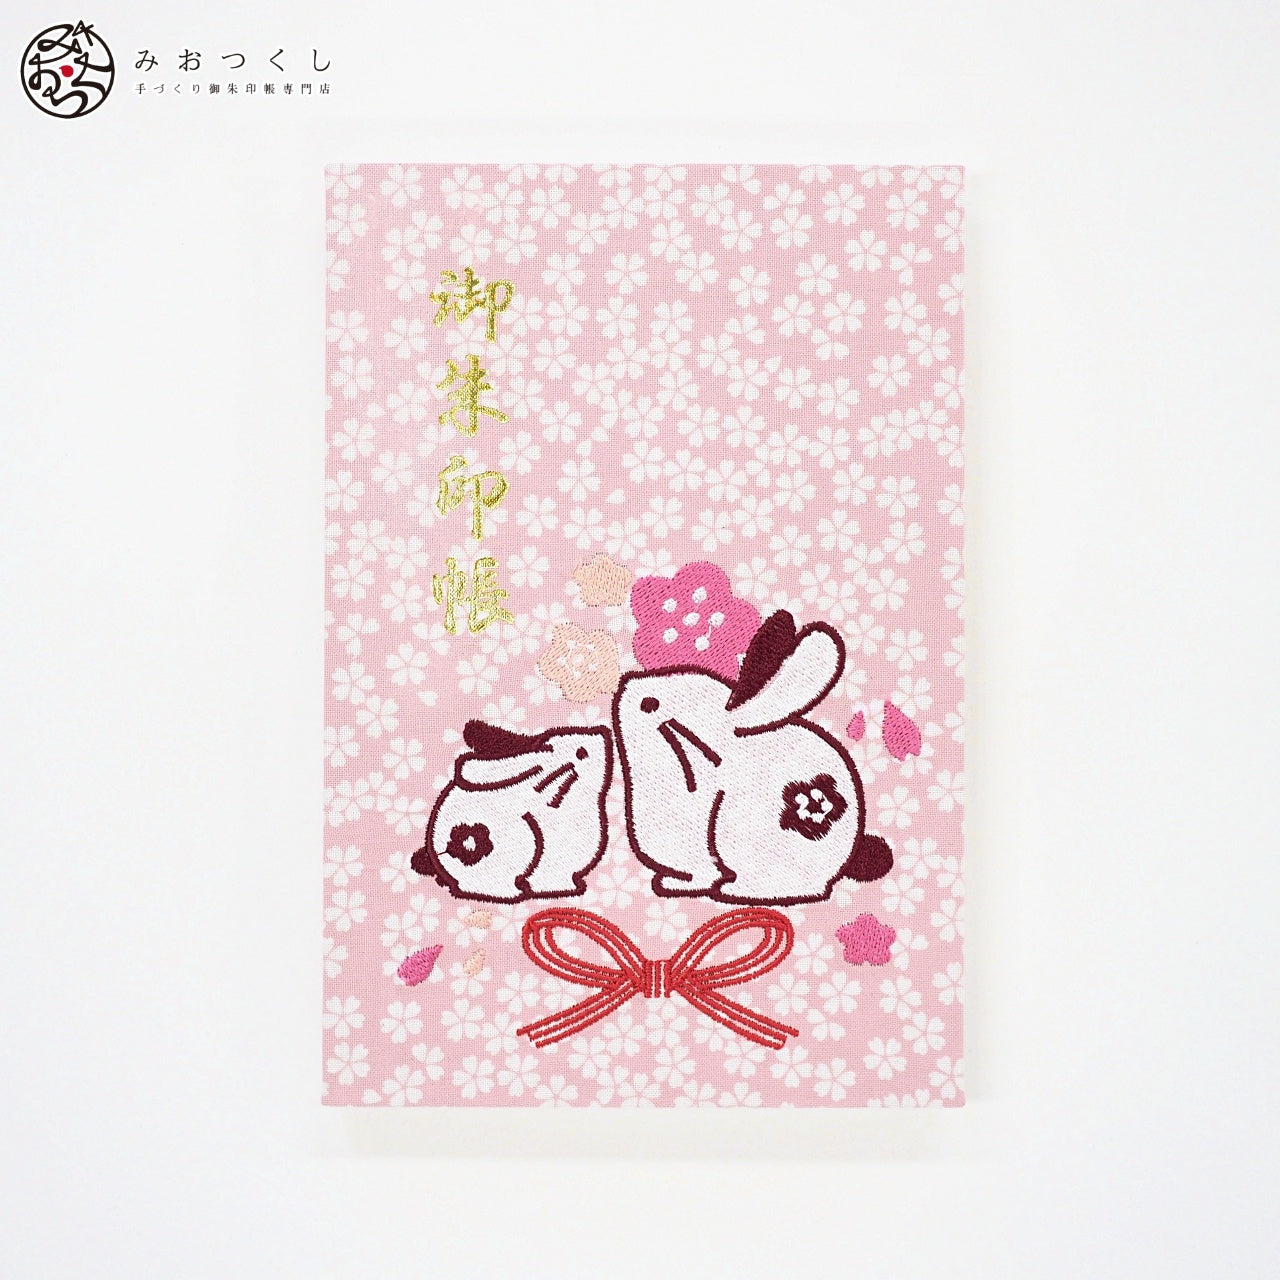 Goshuin book "Limited quantity" embroidery goshuin book/Rabbit (cherry blossoms)